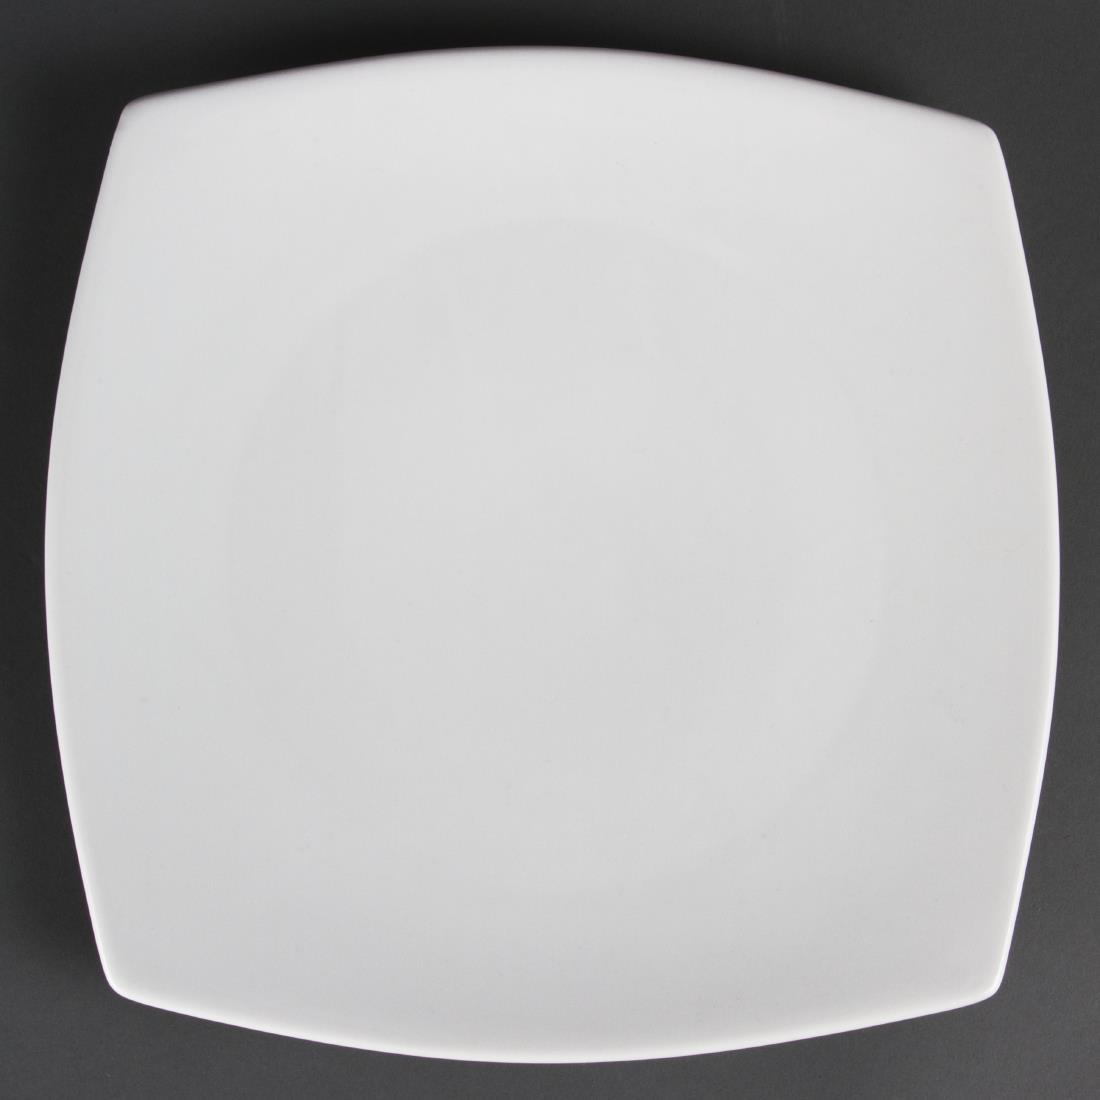 Olympia Whiteware Rounded Square Plates 270mm (Pack of 6) - CB493  - 1